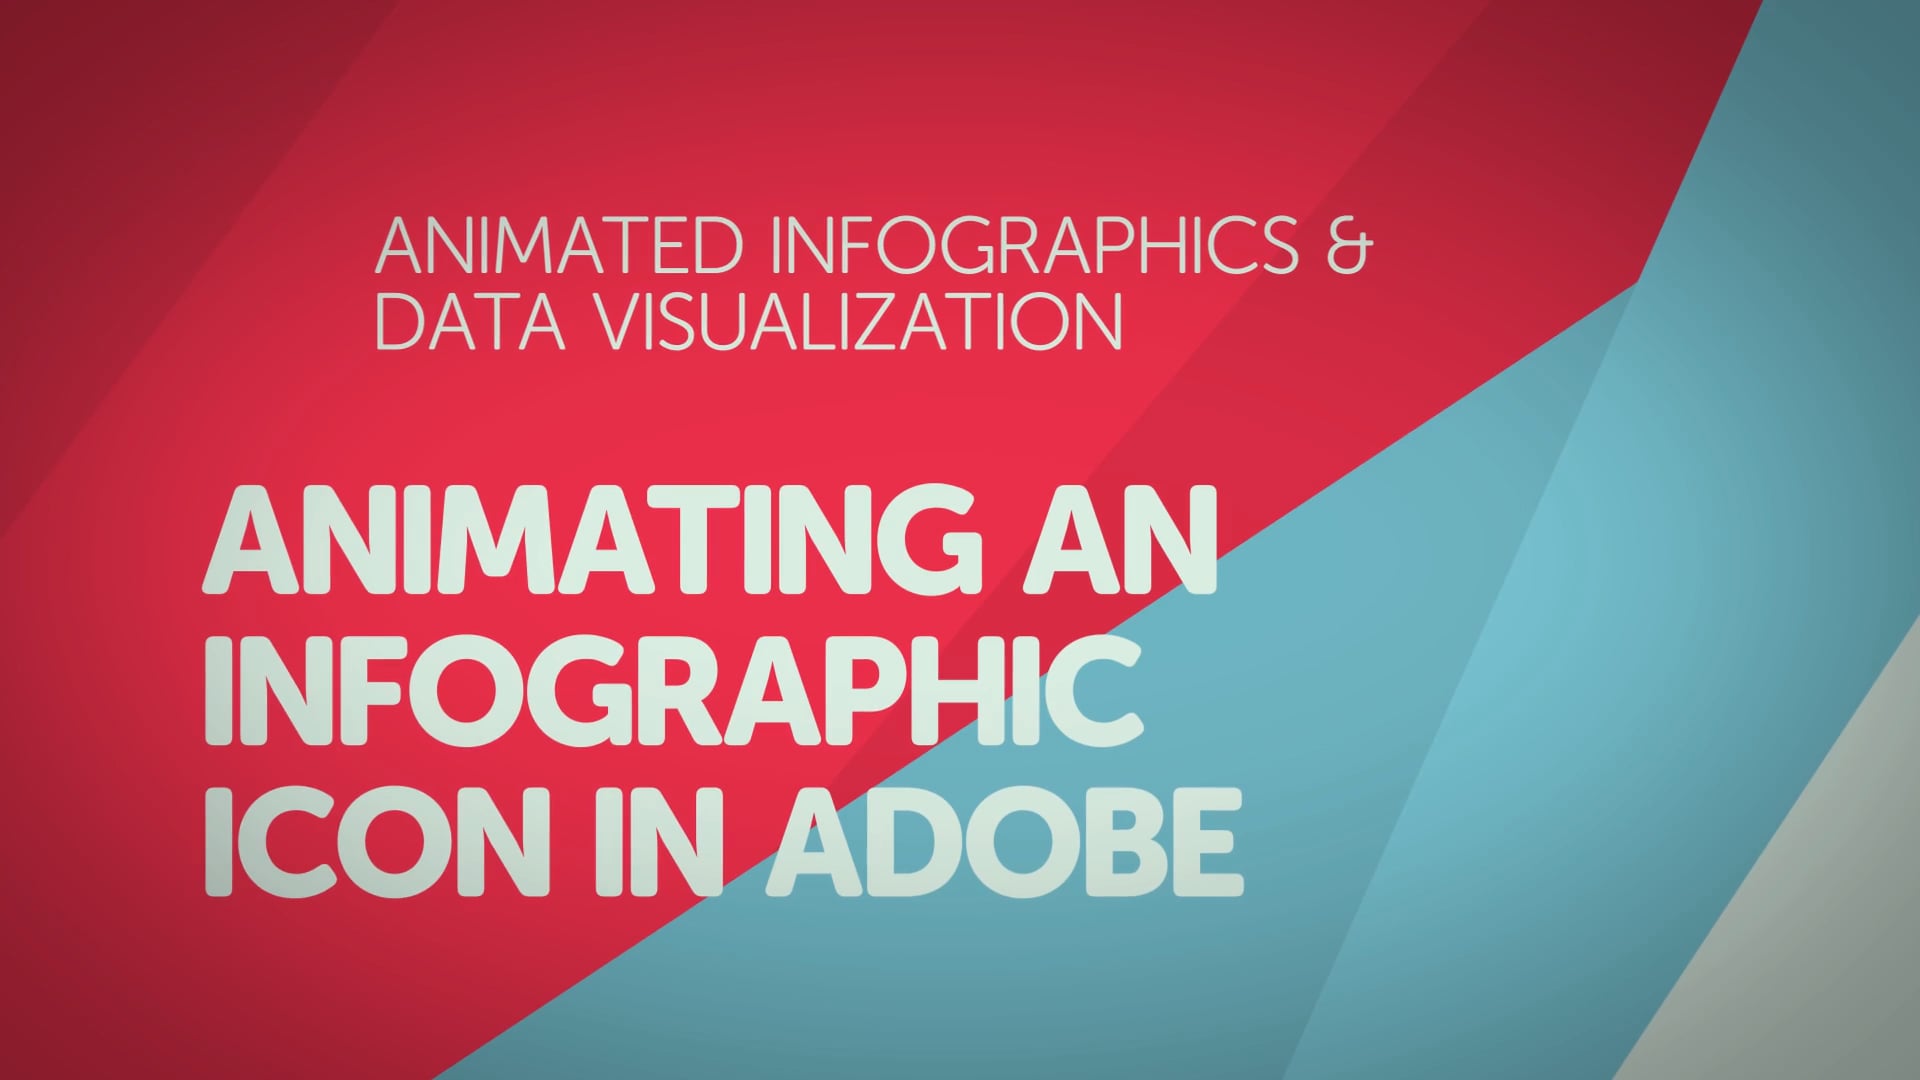 Animating an infographic icon in Adobe After Effects | Bring Your Own Laptop